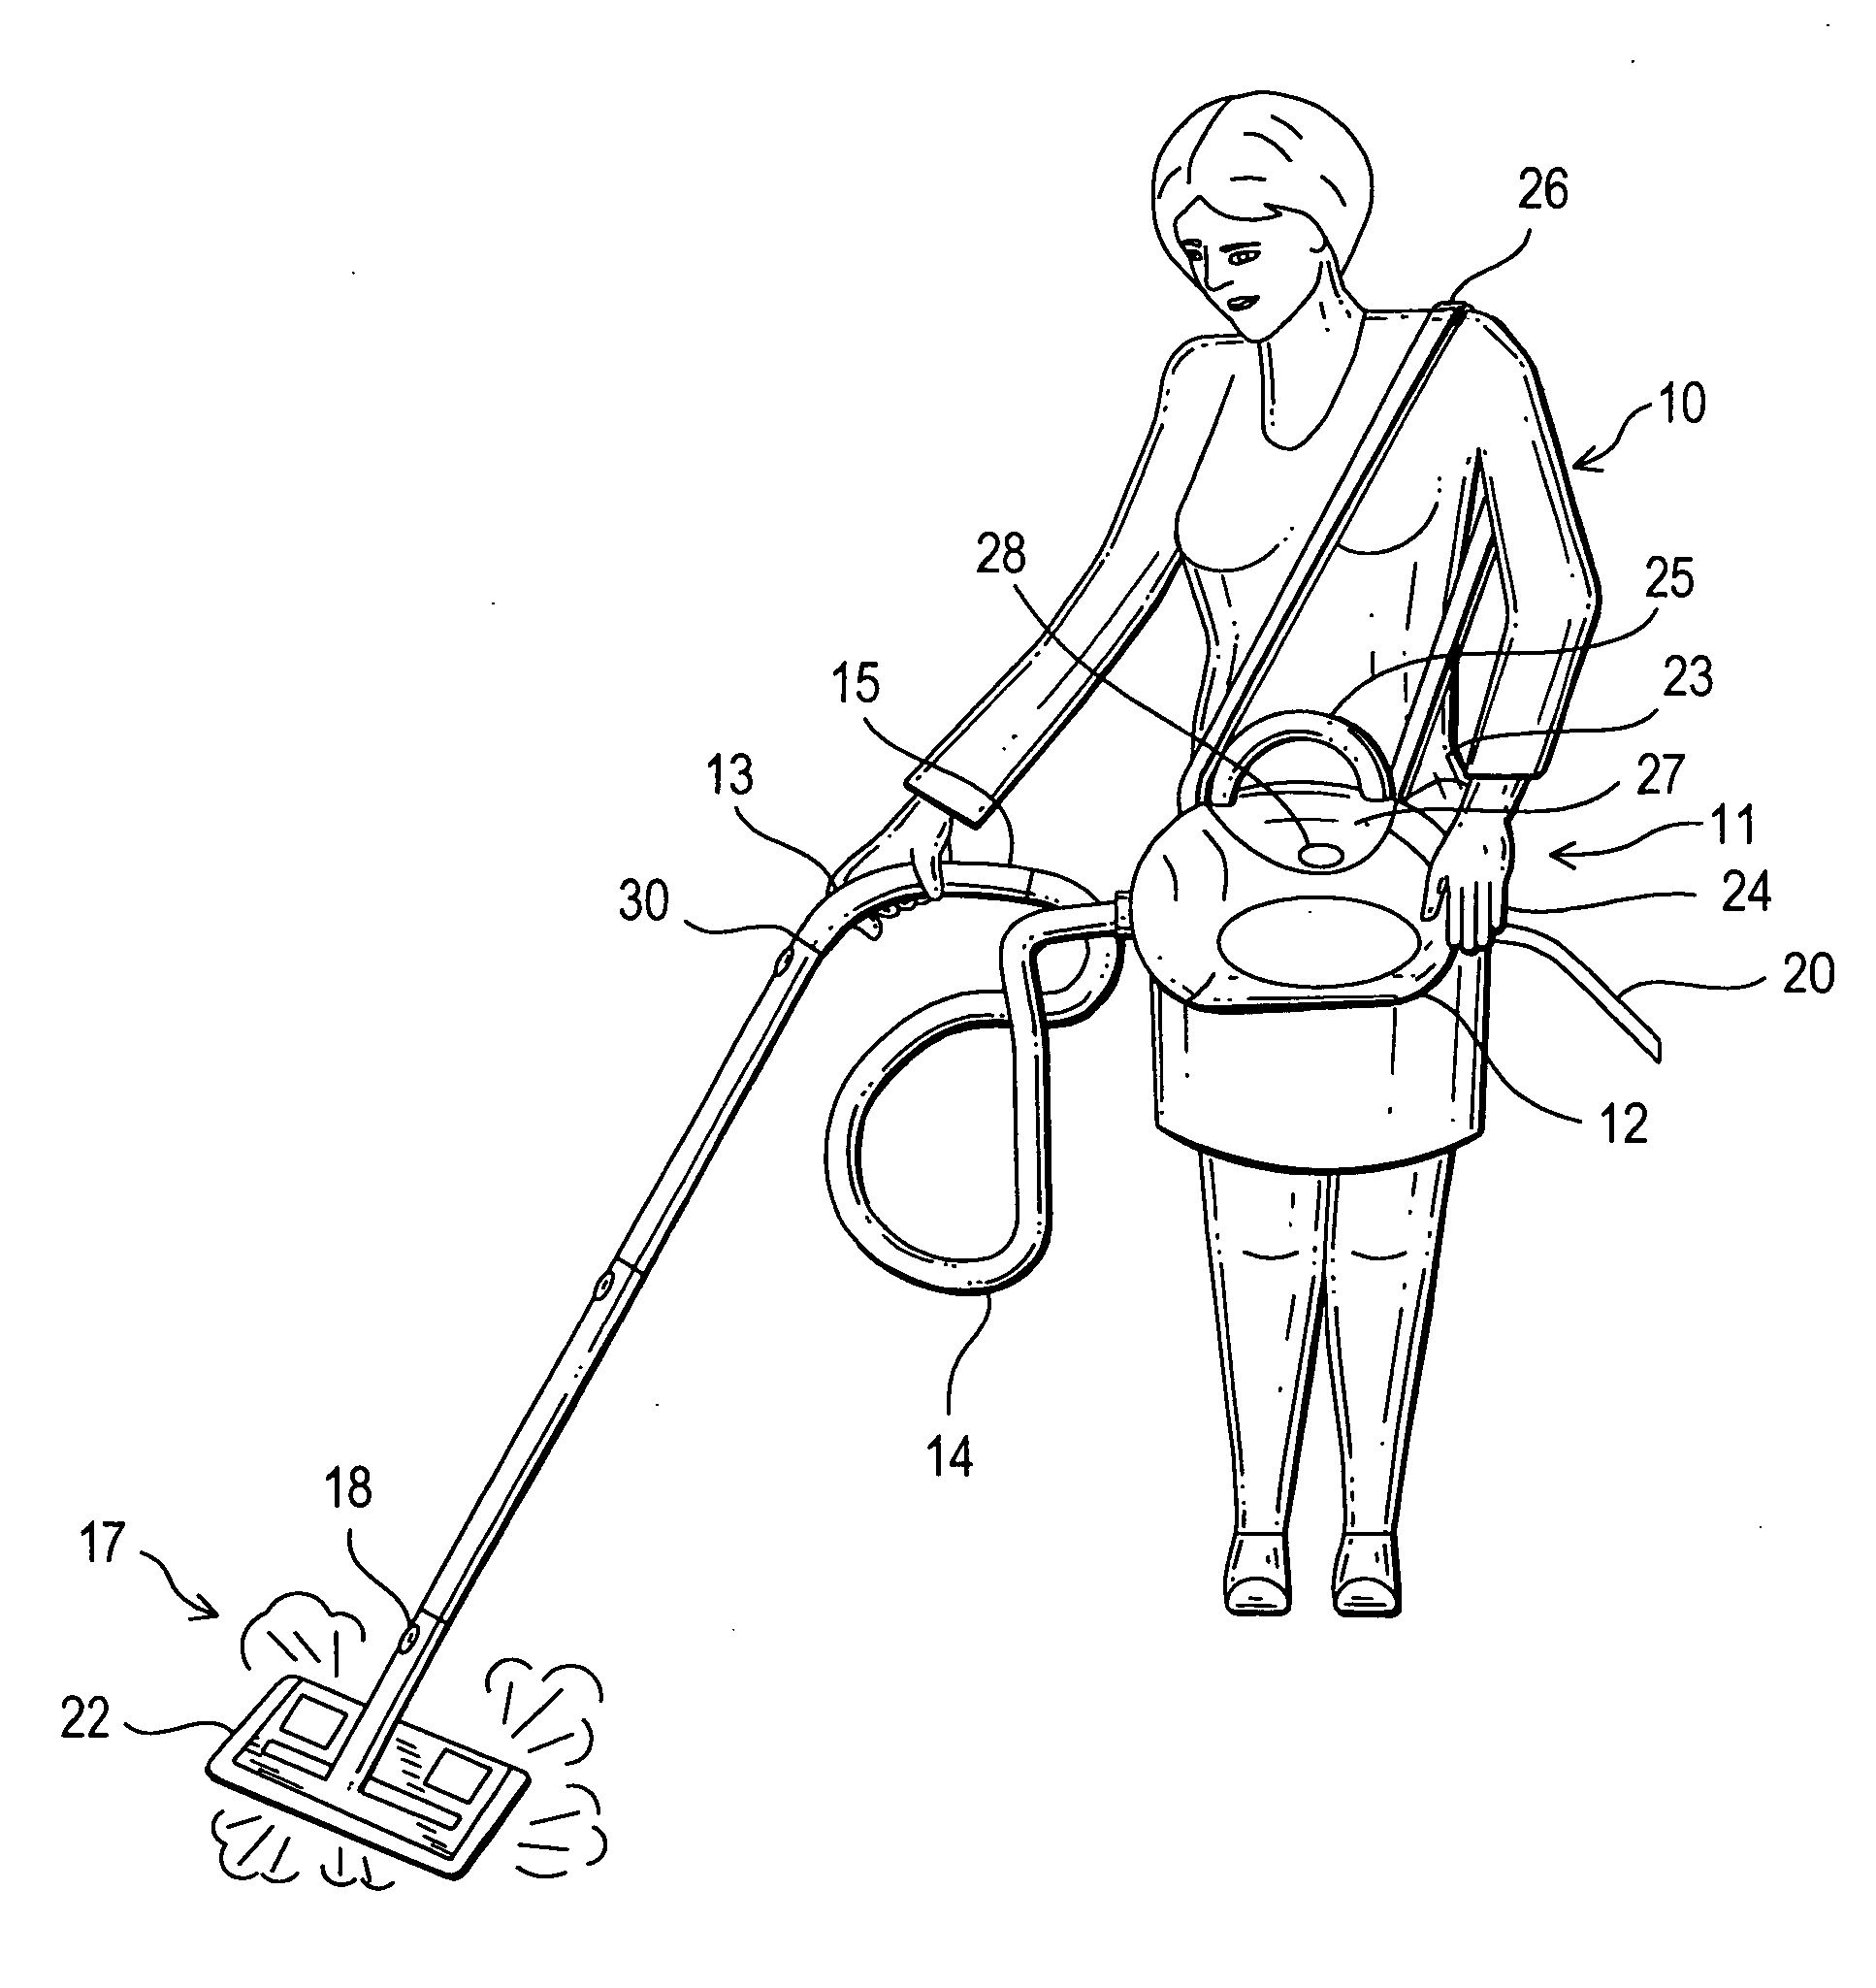 Fabric steam pocket and attachment for use with steam cleaner